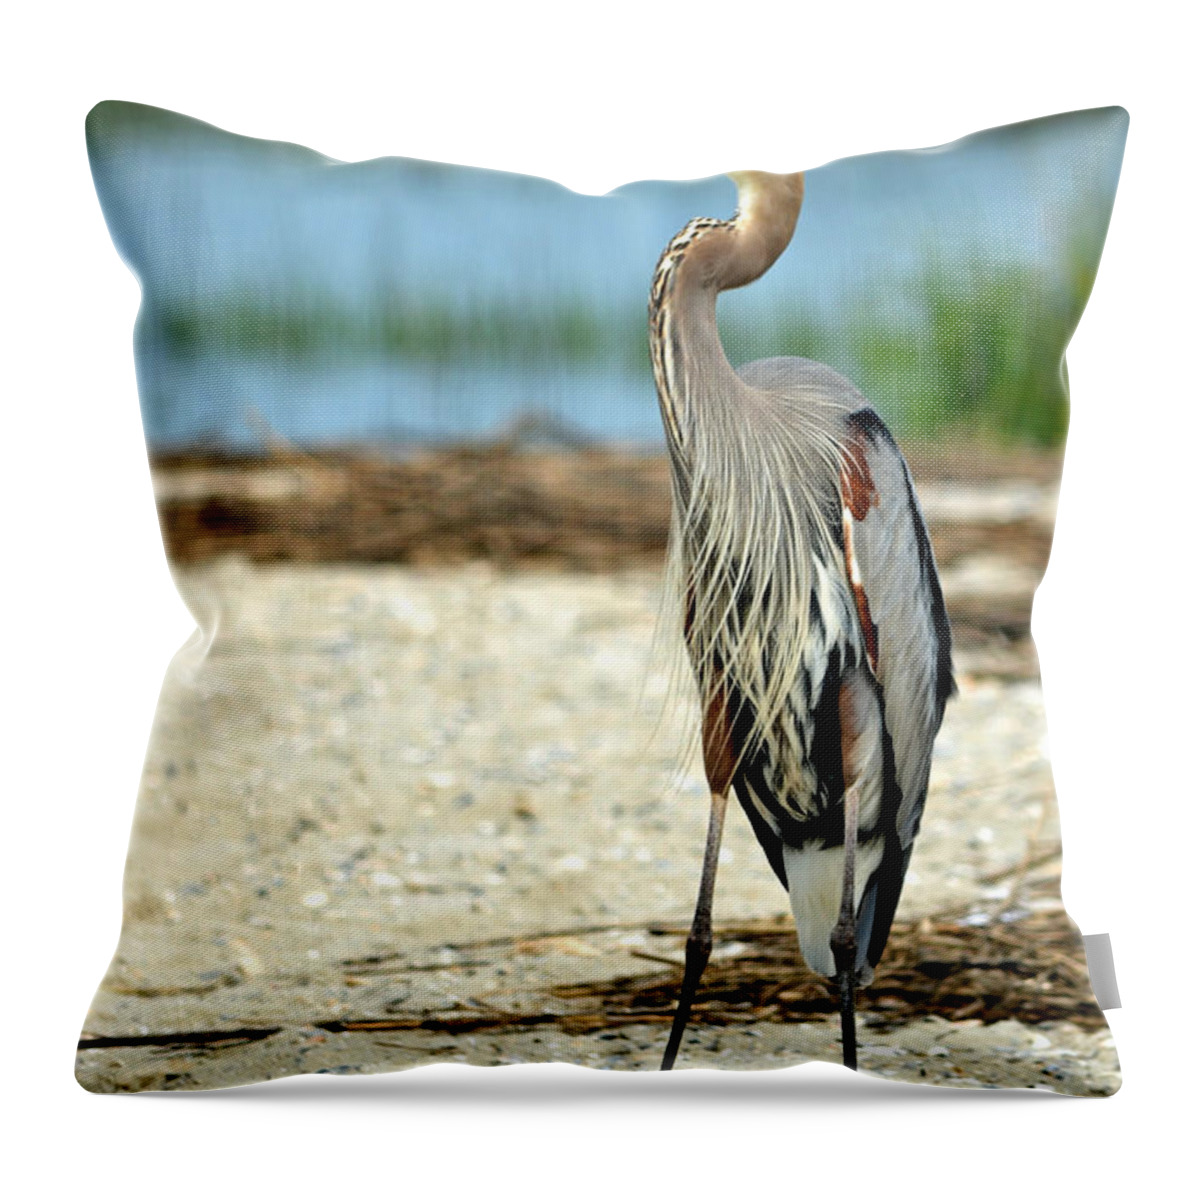 Blue Heron Throw Pillow featuring the photograph Blue Heron Portrait by Sandi OReilly